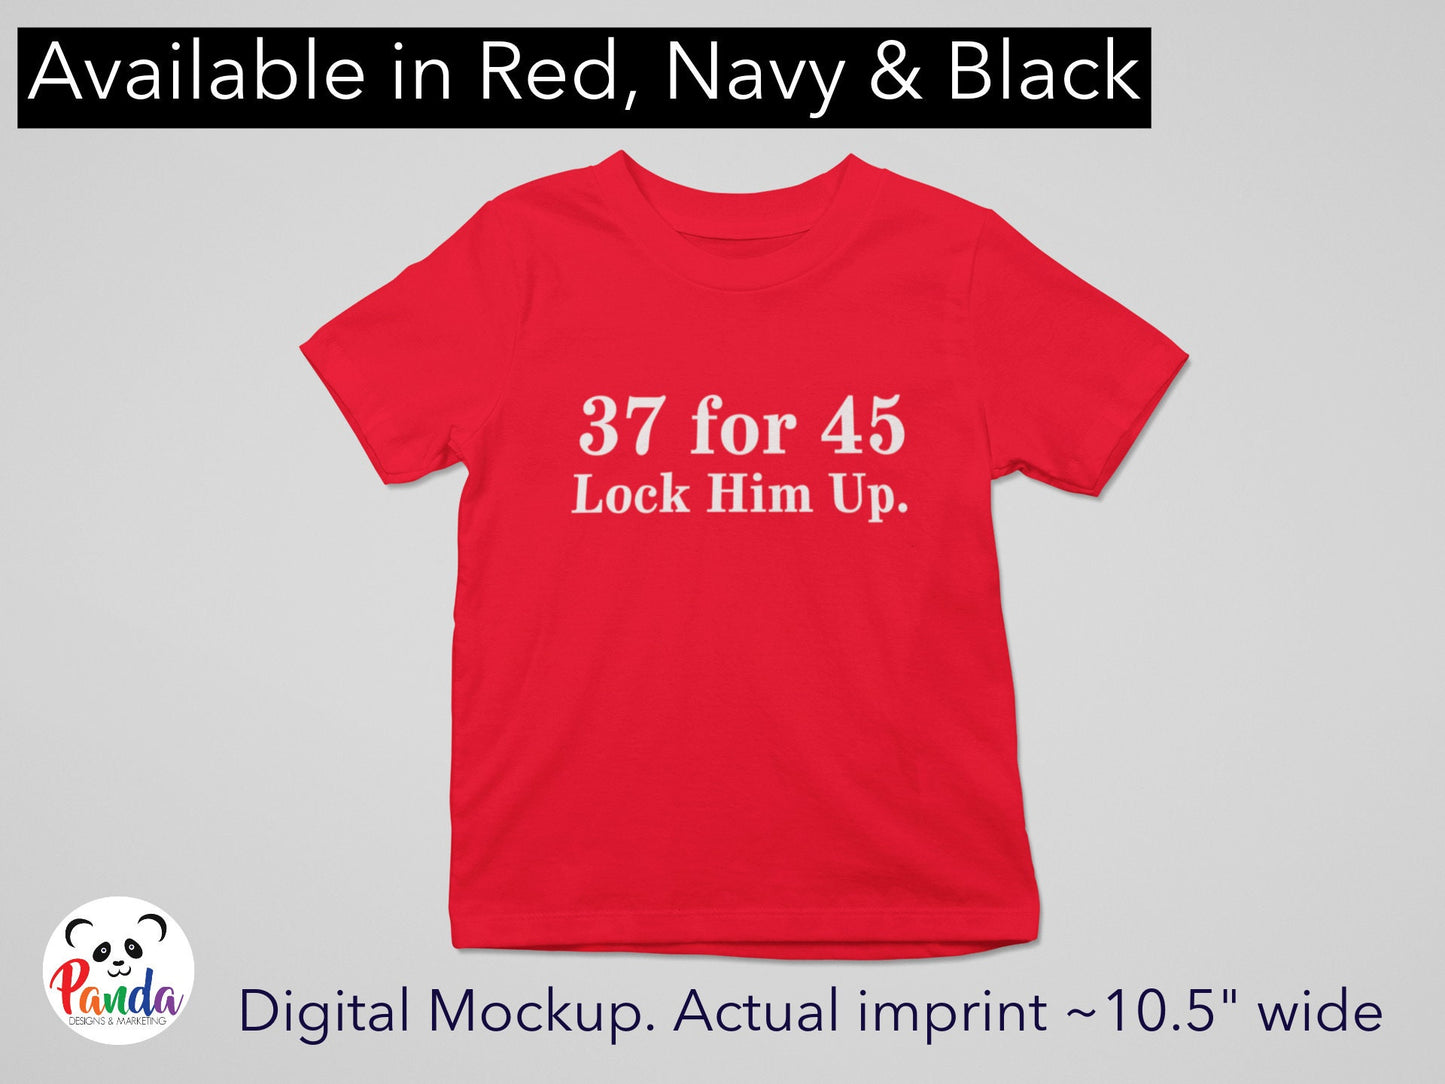 37 for 45 Lock Him Up T-shirt - Federal Indictments for Former President Trump - Show your support for justice.